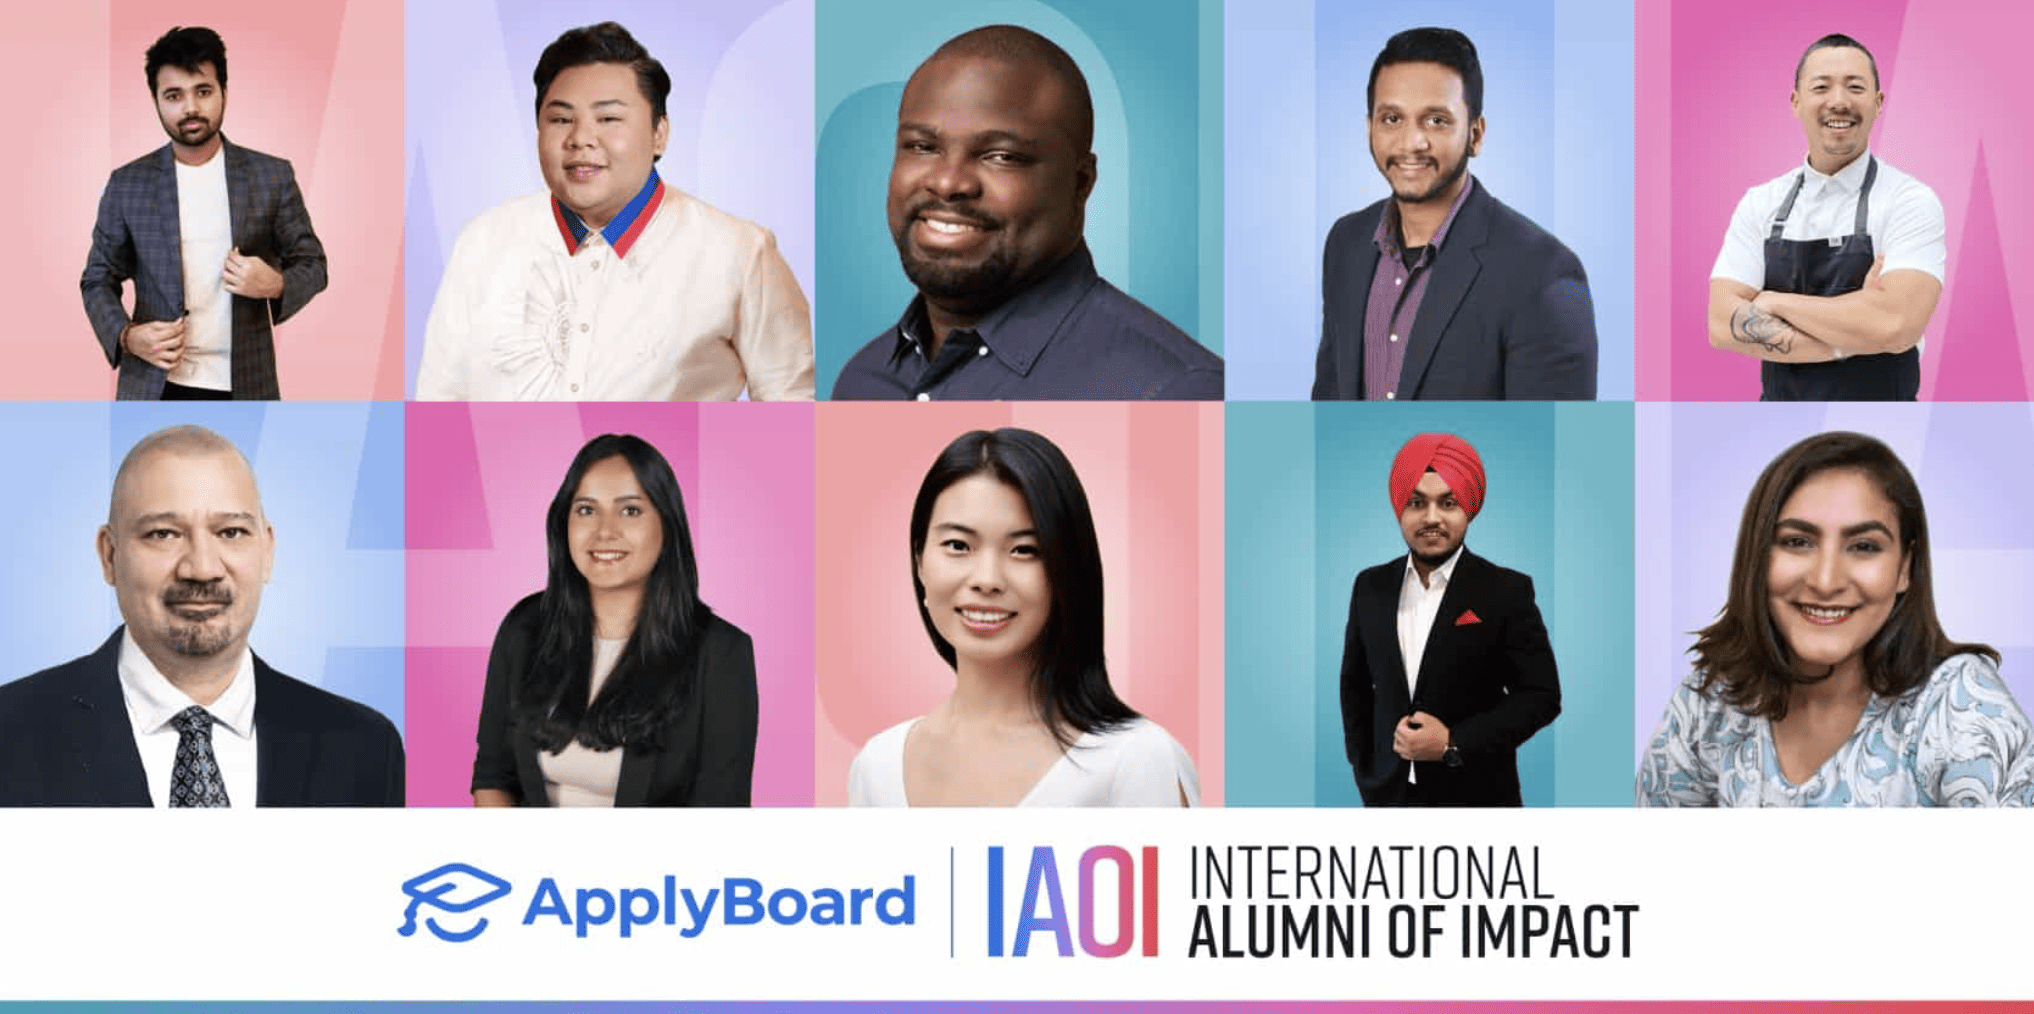 International Alumni of Impact celebrates the stories of former international students who studied in Canada and have gone on to make a positive impact in their community.